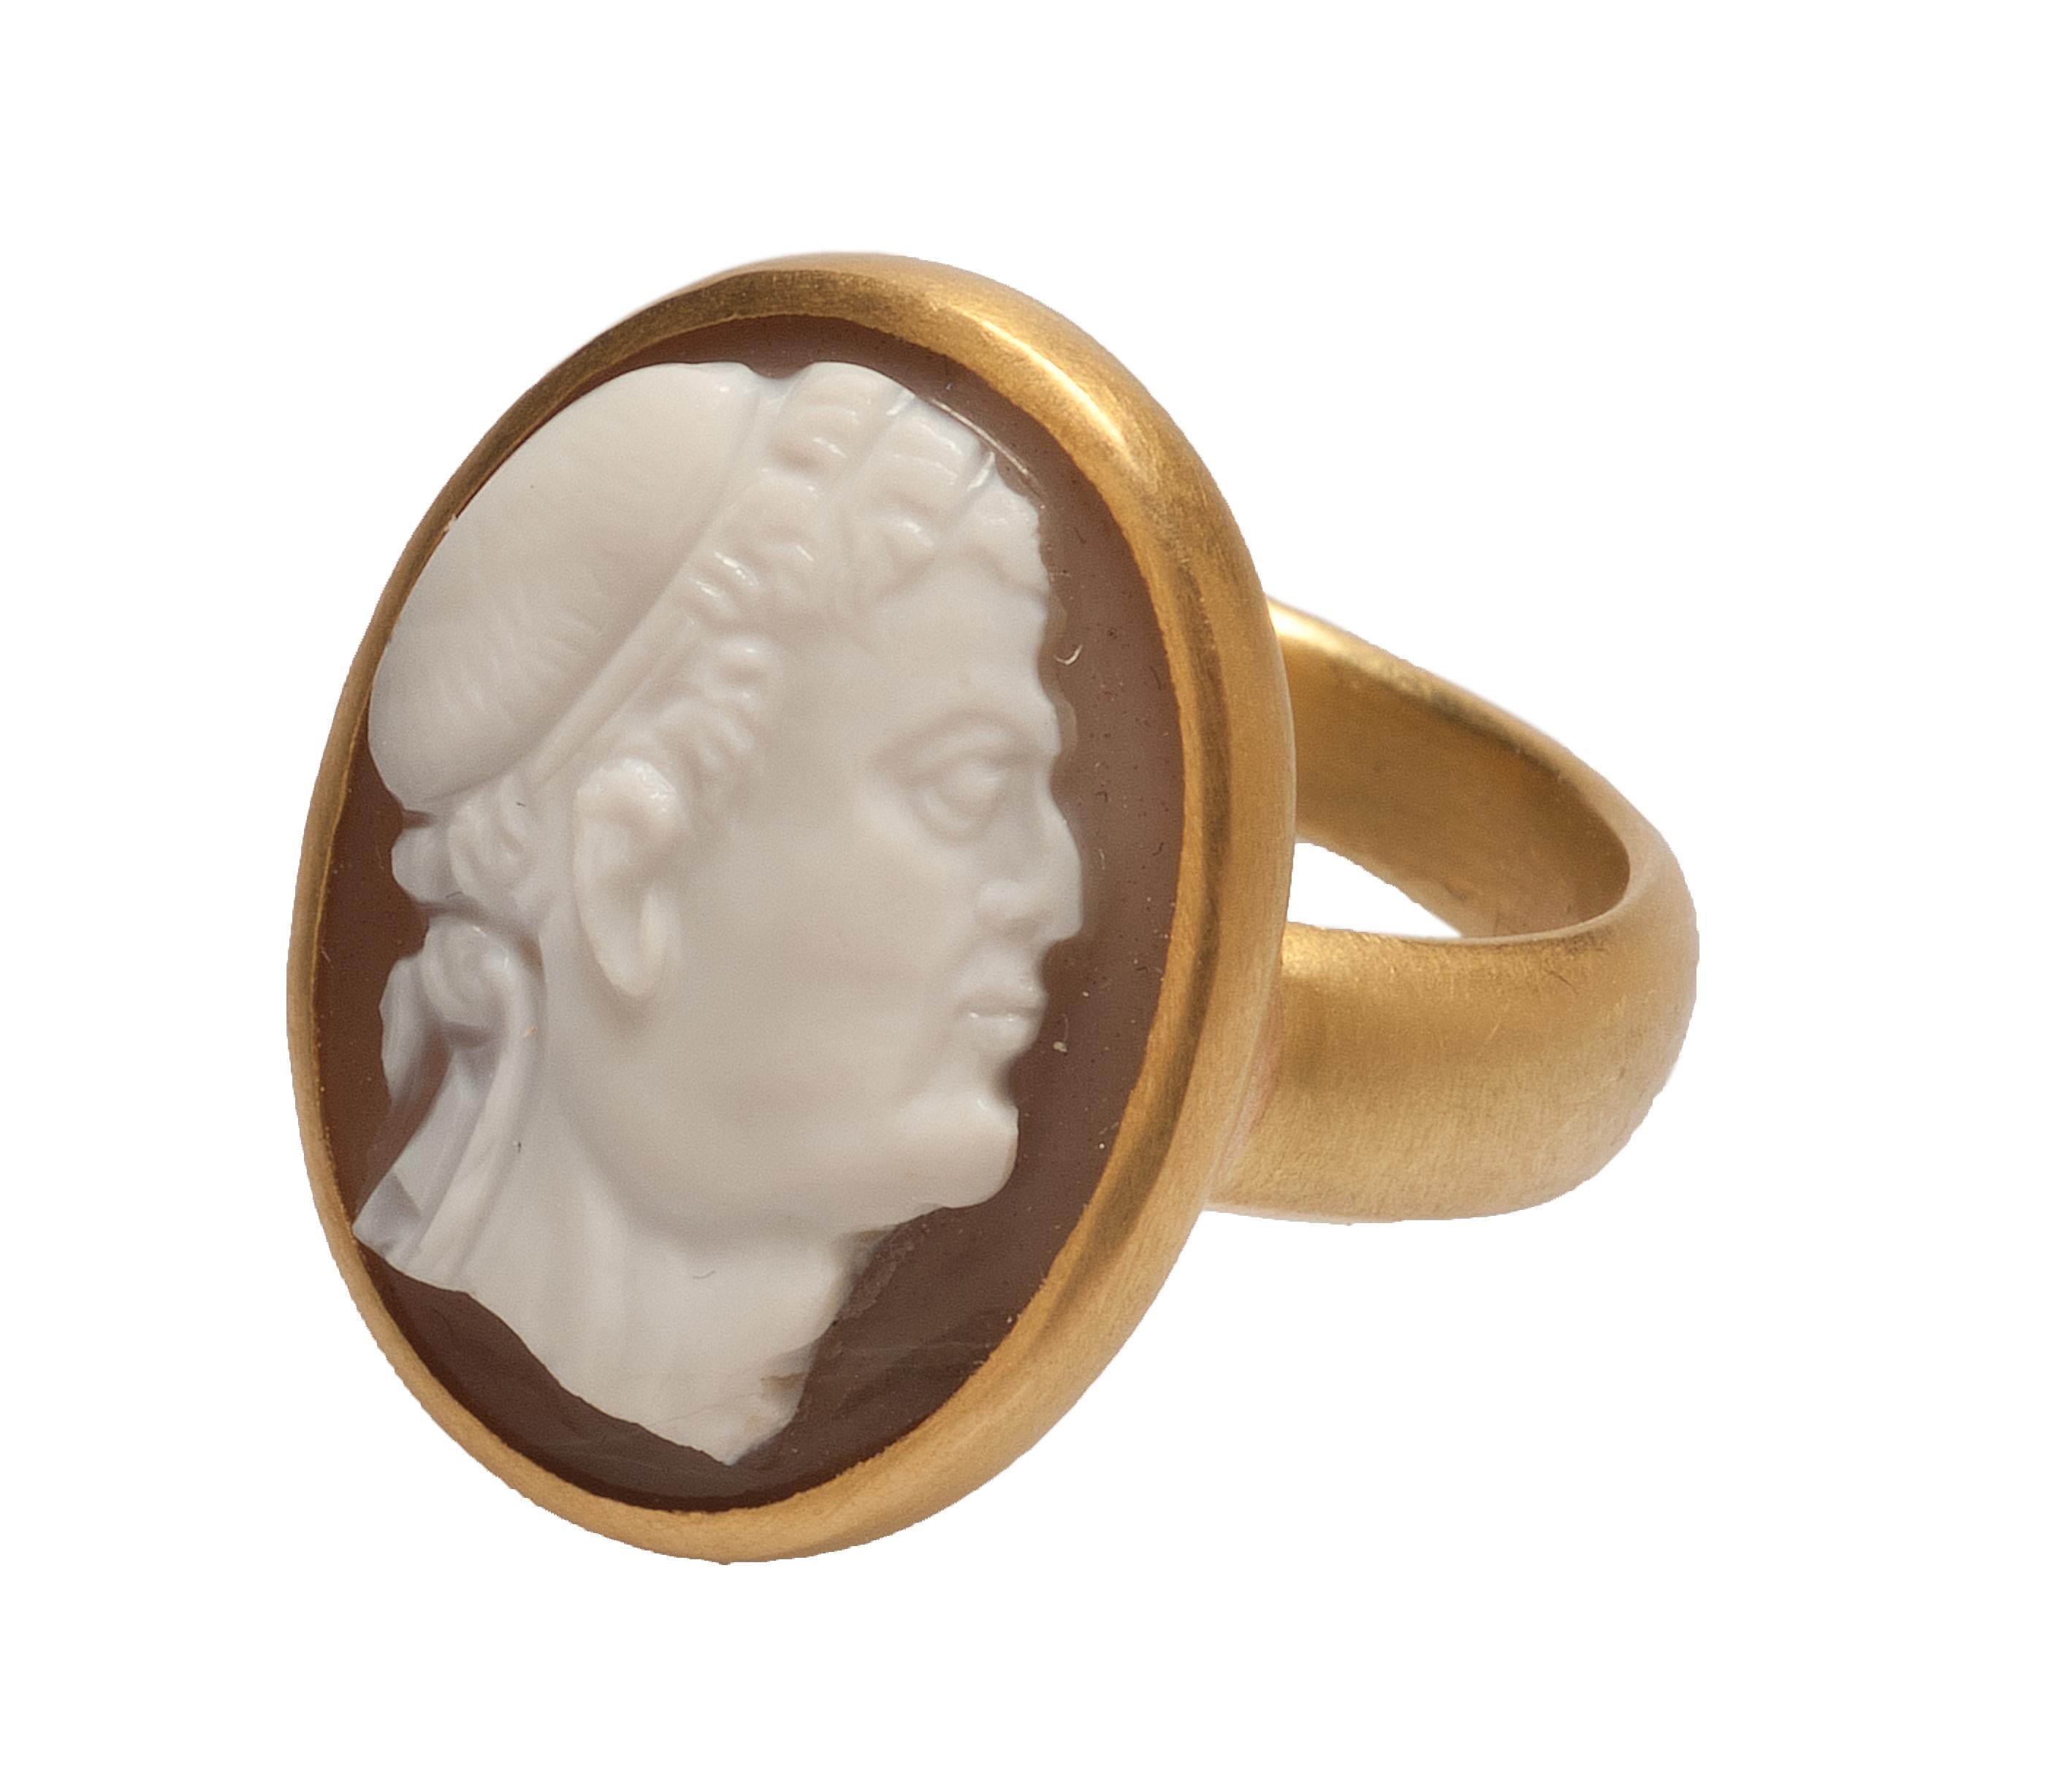 Renaissance Cameo Of Galba (?) in Modern Gold Setting
Europe, 17th (?) century
Onyx and gold
Weight: 10.2 g.; circumference: 51.8 mm.; size: US 6, UK L ½

Substantial D-section hoop in brushed gold supports an oval bezel set with an onyx (white